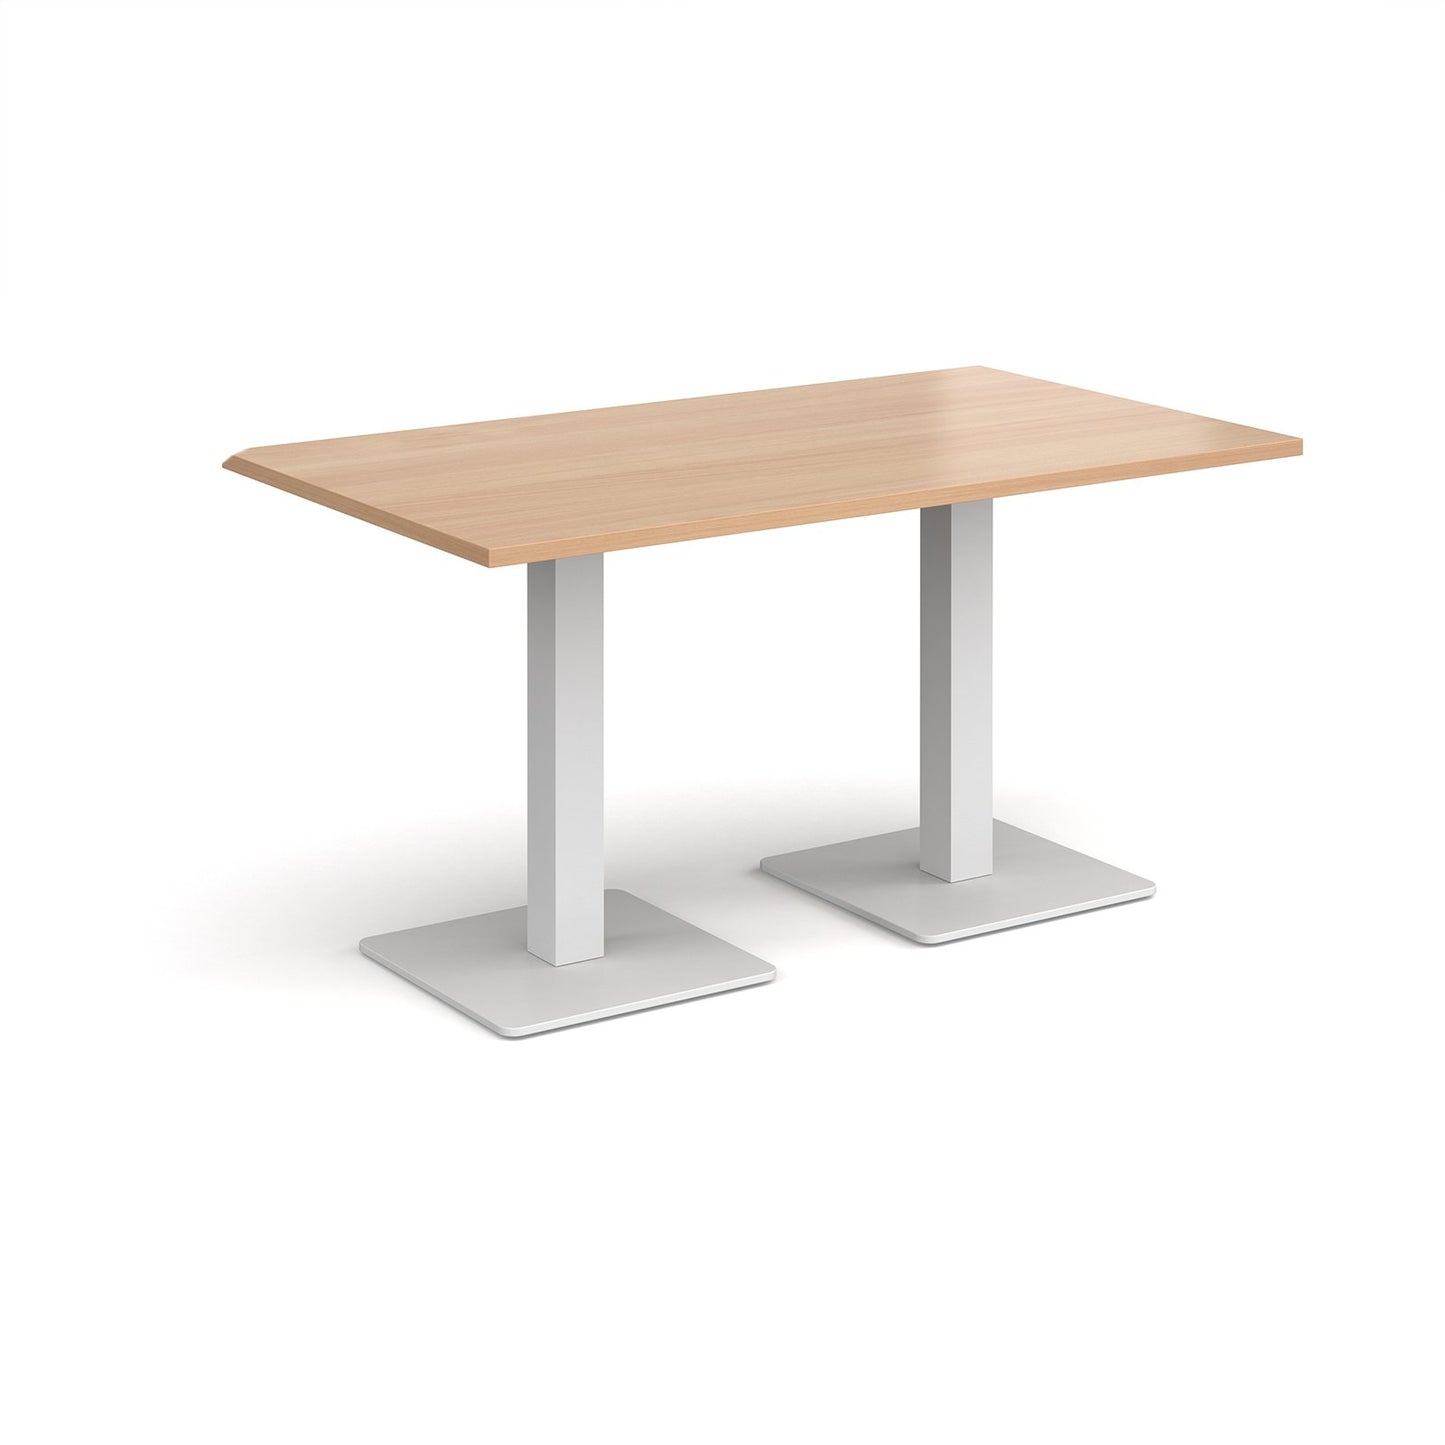 Brescia rectangular dining table with square bases